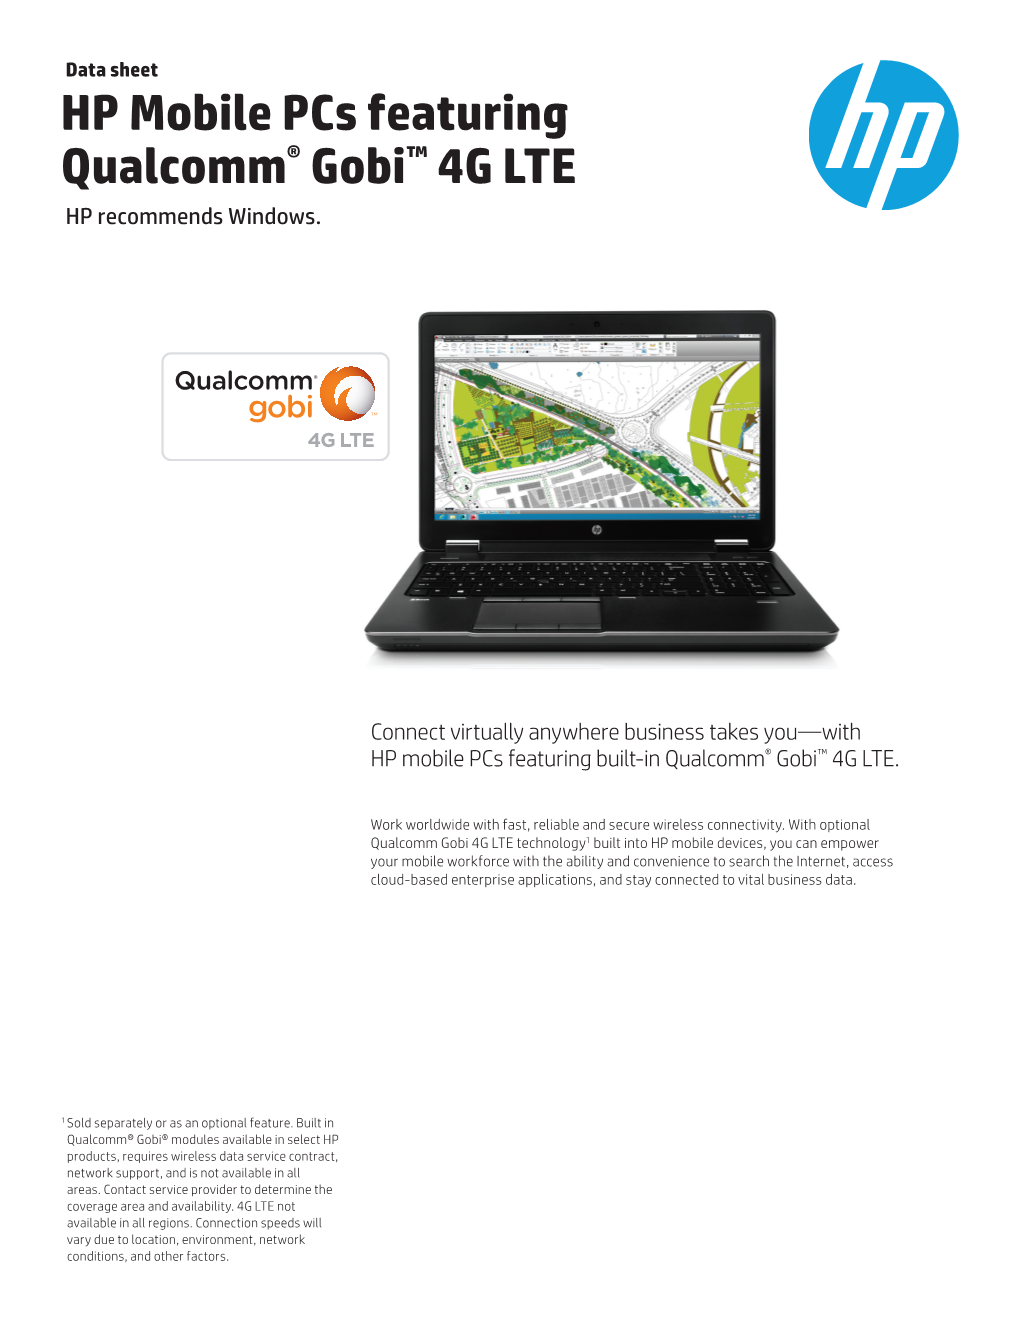 HP Mobile Pcs Featuring Qualcomm® Gobi™ 4G LTE HP Recommends Windows